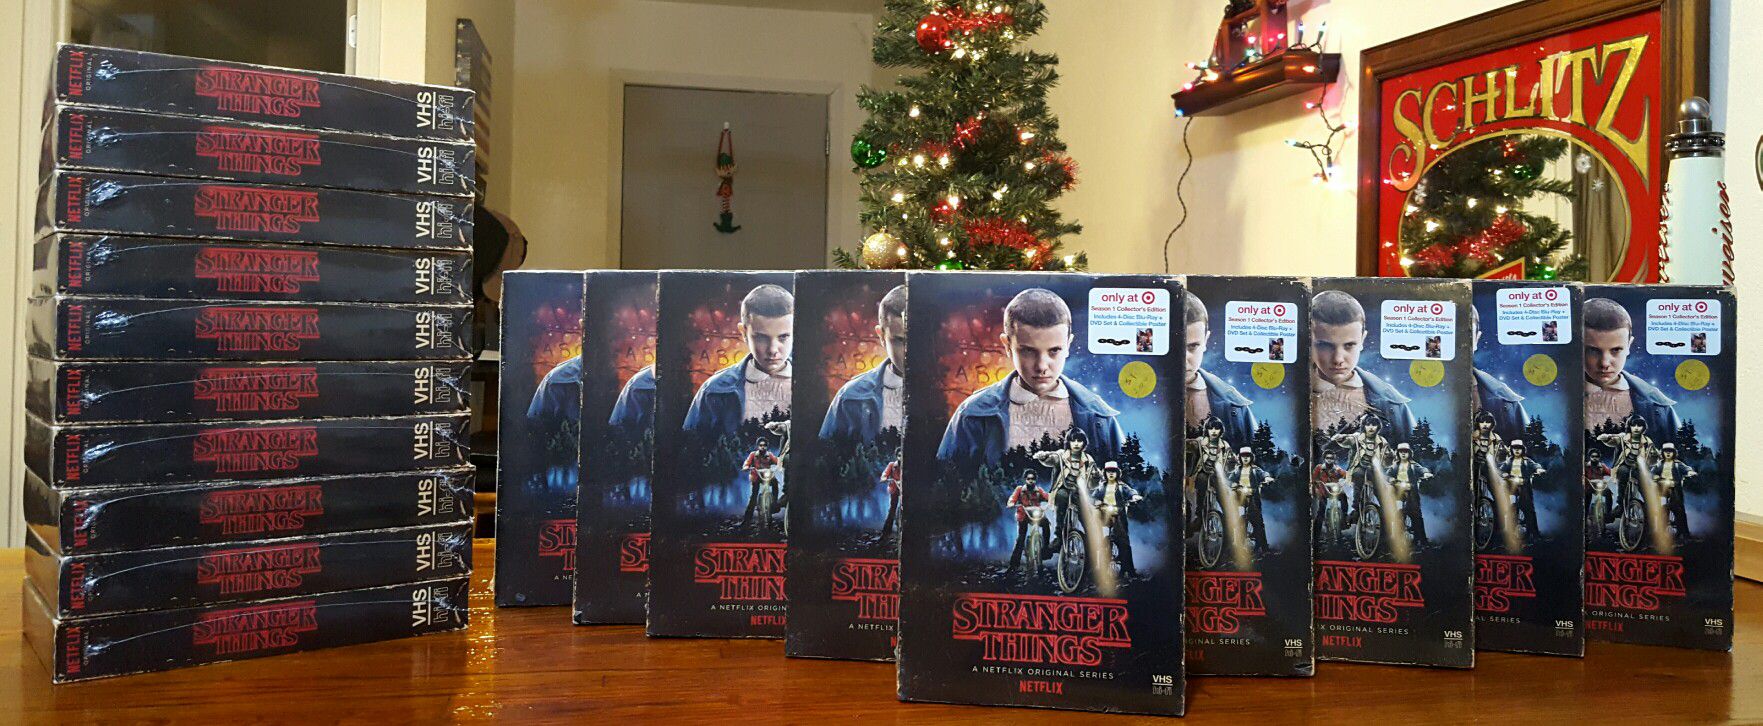 New Lot of 18 Netflix Stranger Things Season 1 - 4 Disk Blu-Ray/DVD Collector's Box Set & Collectable Poster